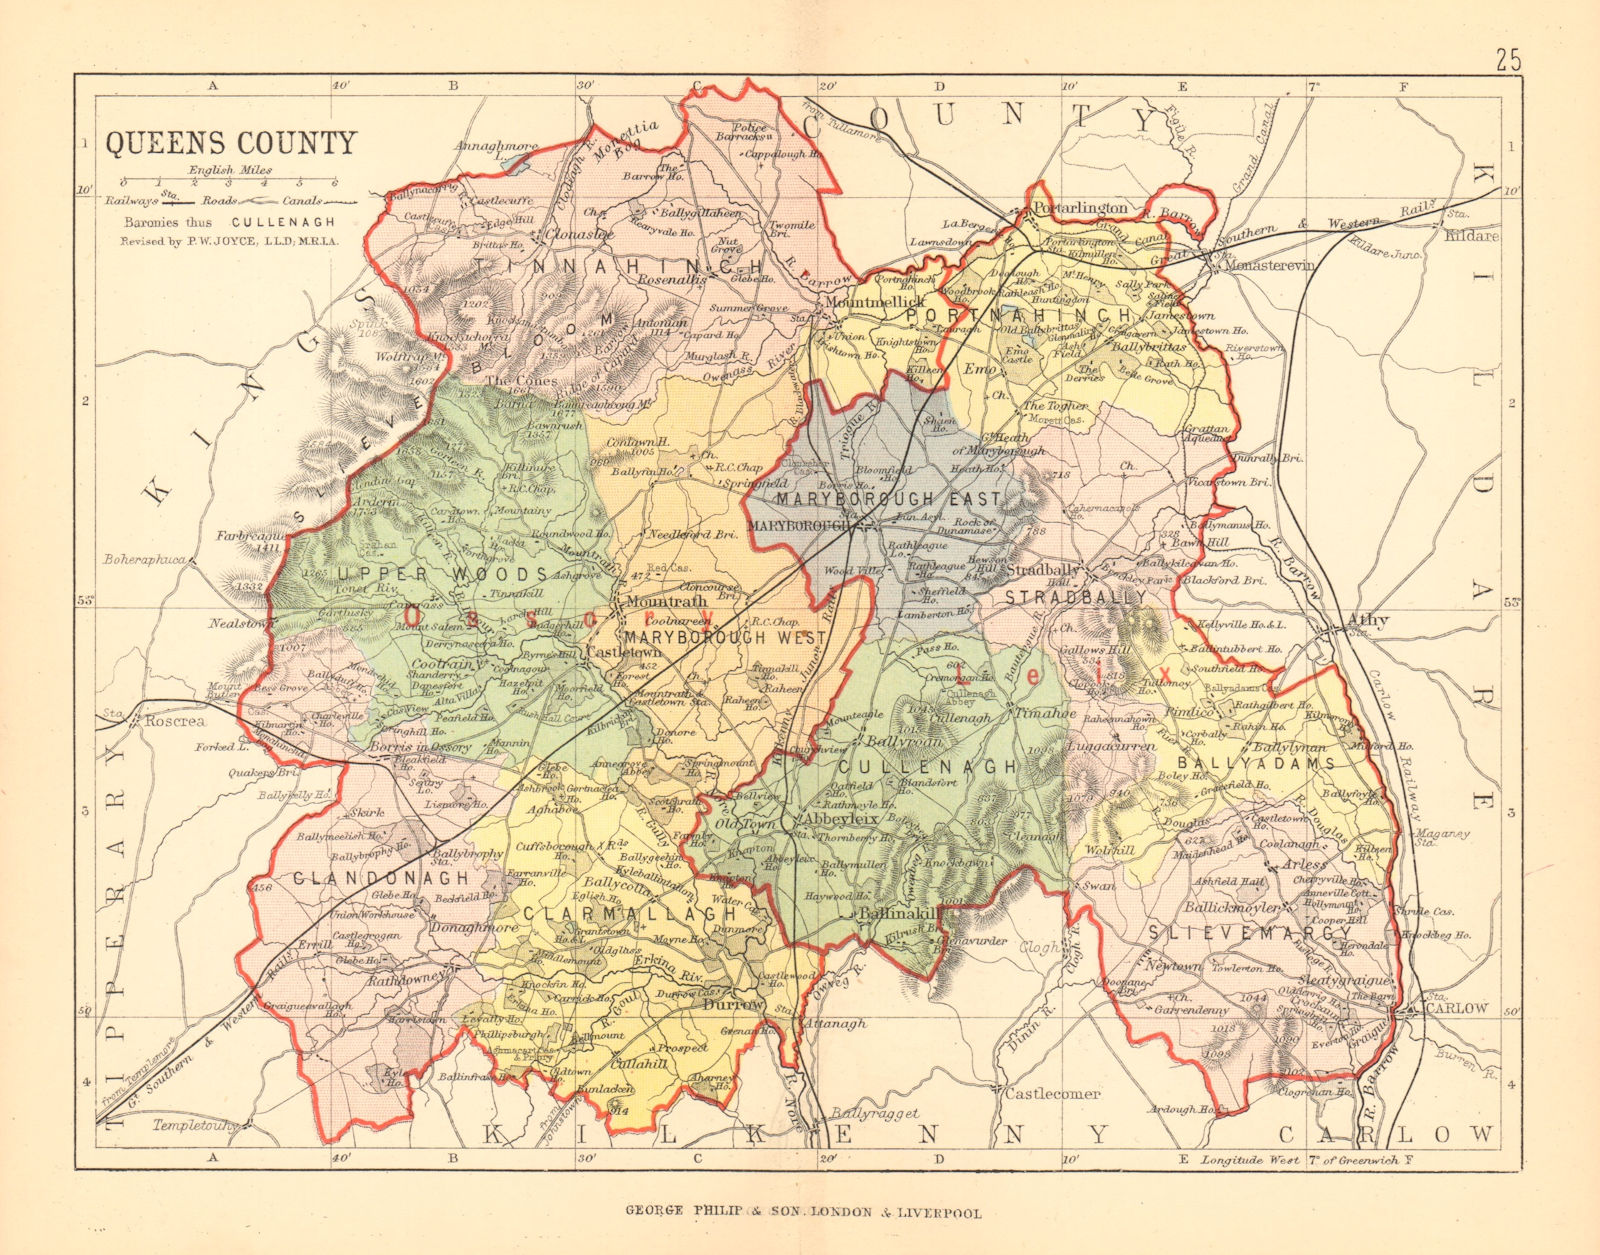 QUEENS COUNTY (LAOIS) . Antique county map. Leinster. Ireland. BARTHOLOMEW 1886